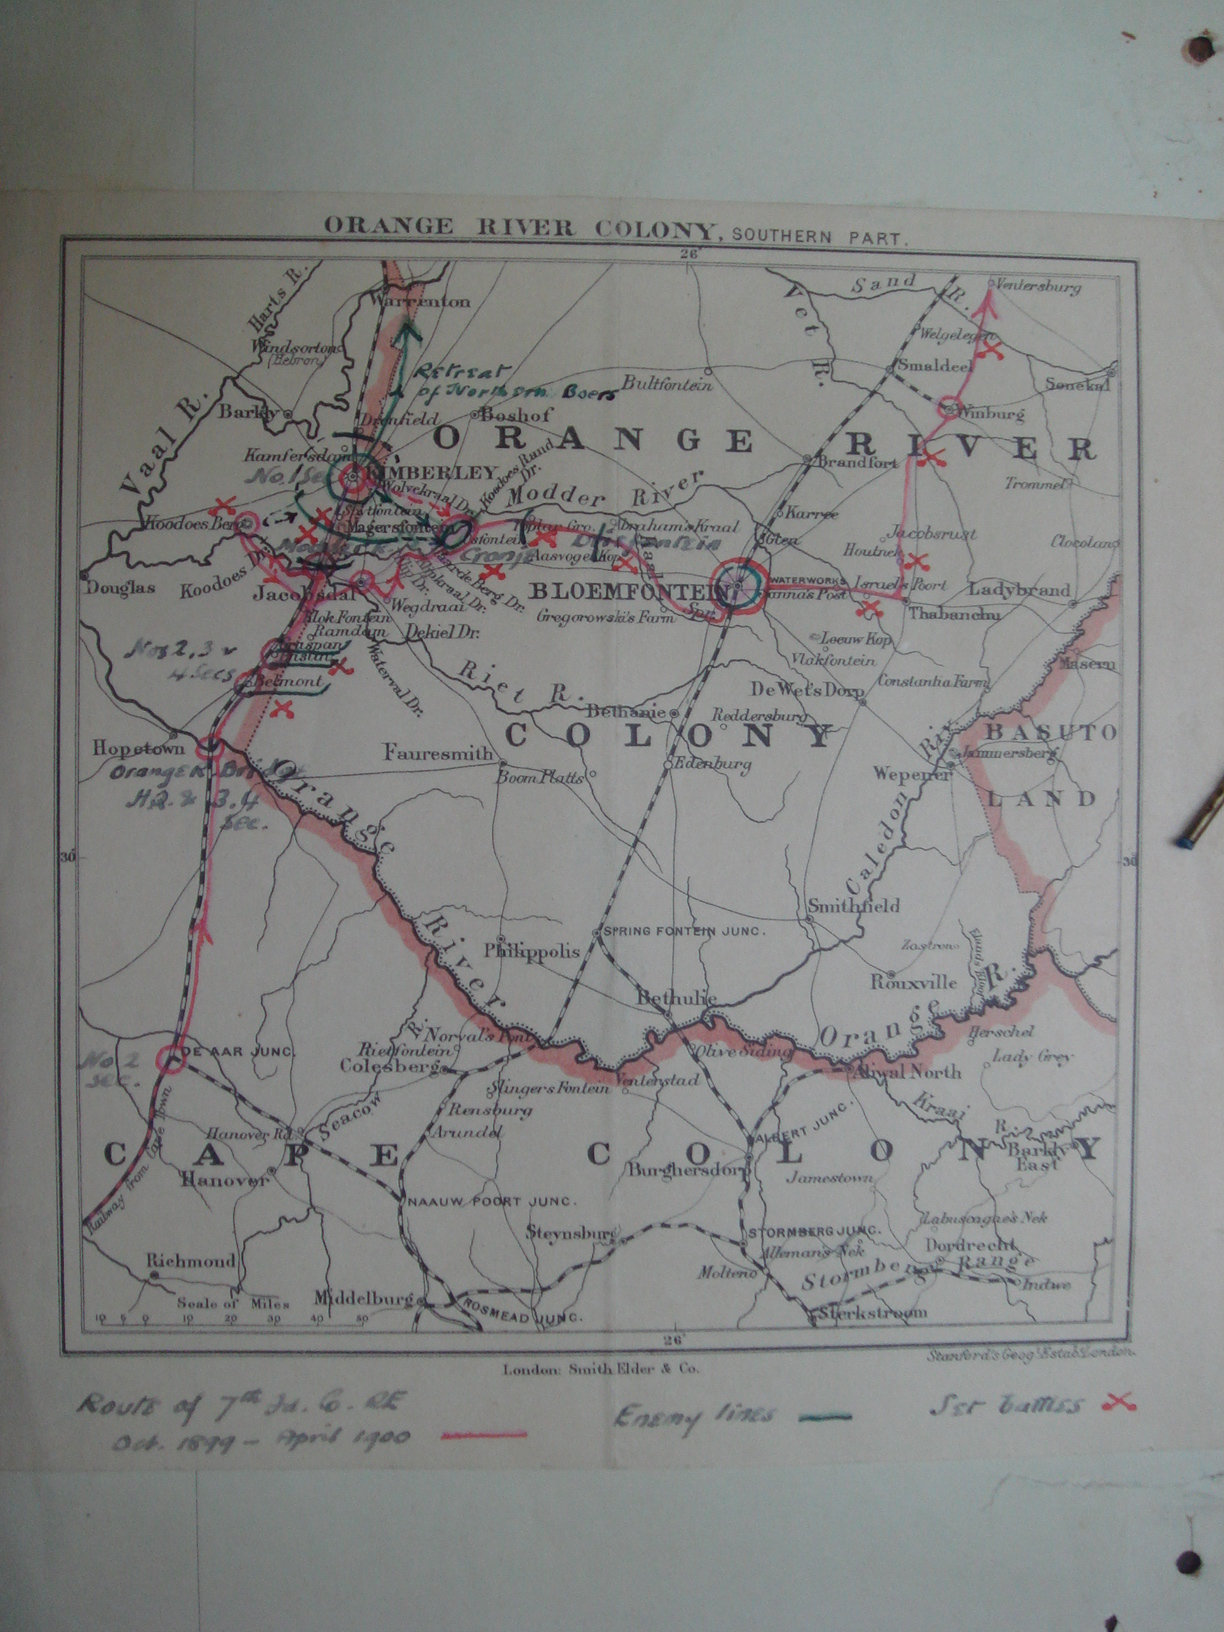 Route of 7 Field Company Oct 1899 - Apr 1900